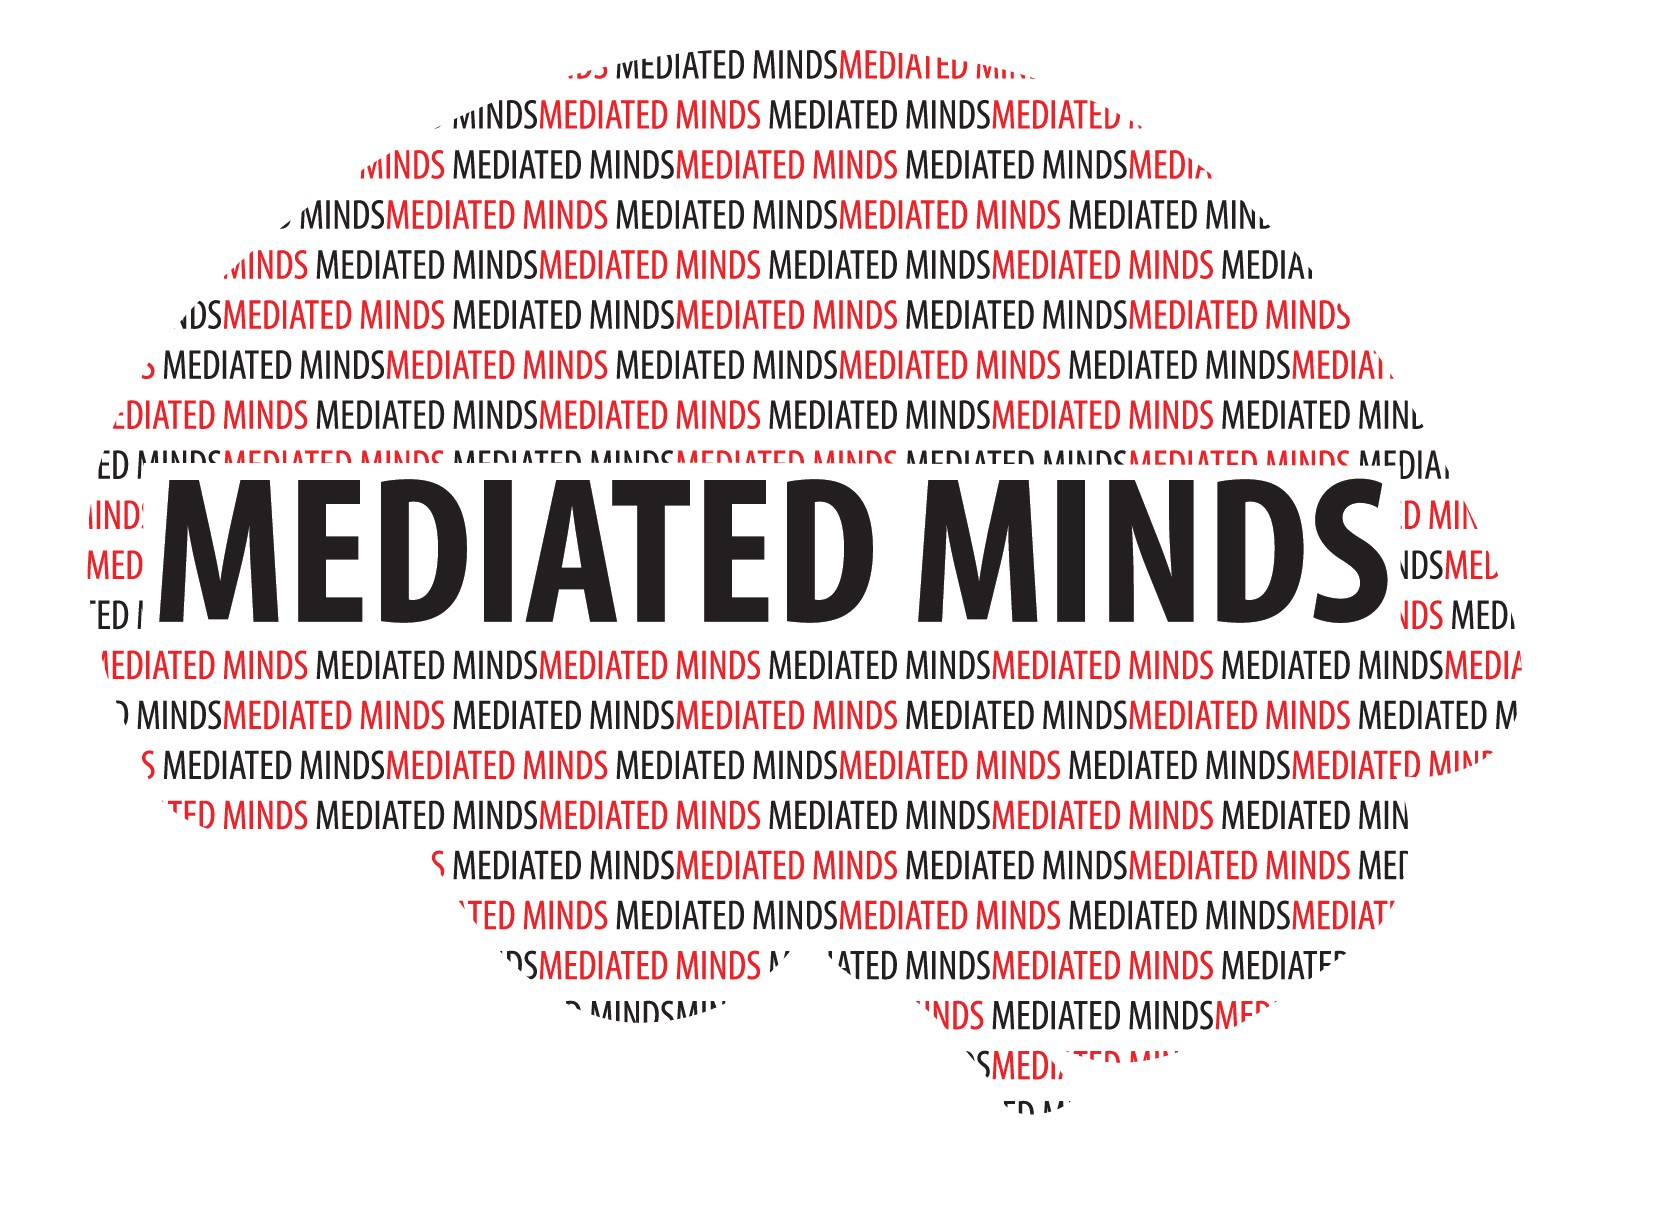 Logo of the Mediated Minds Conference